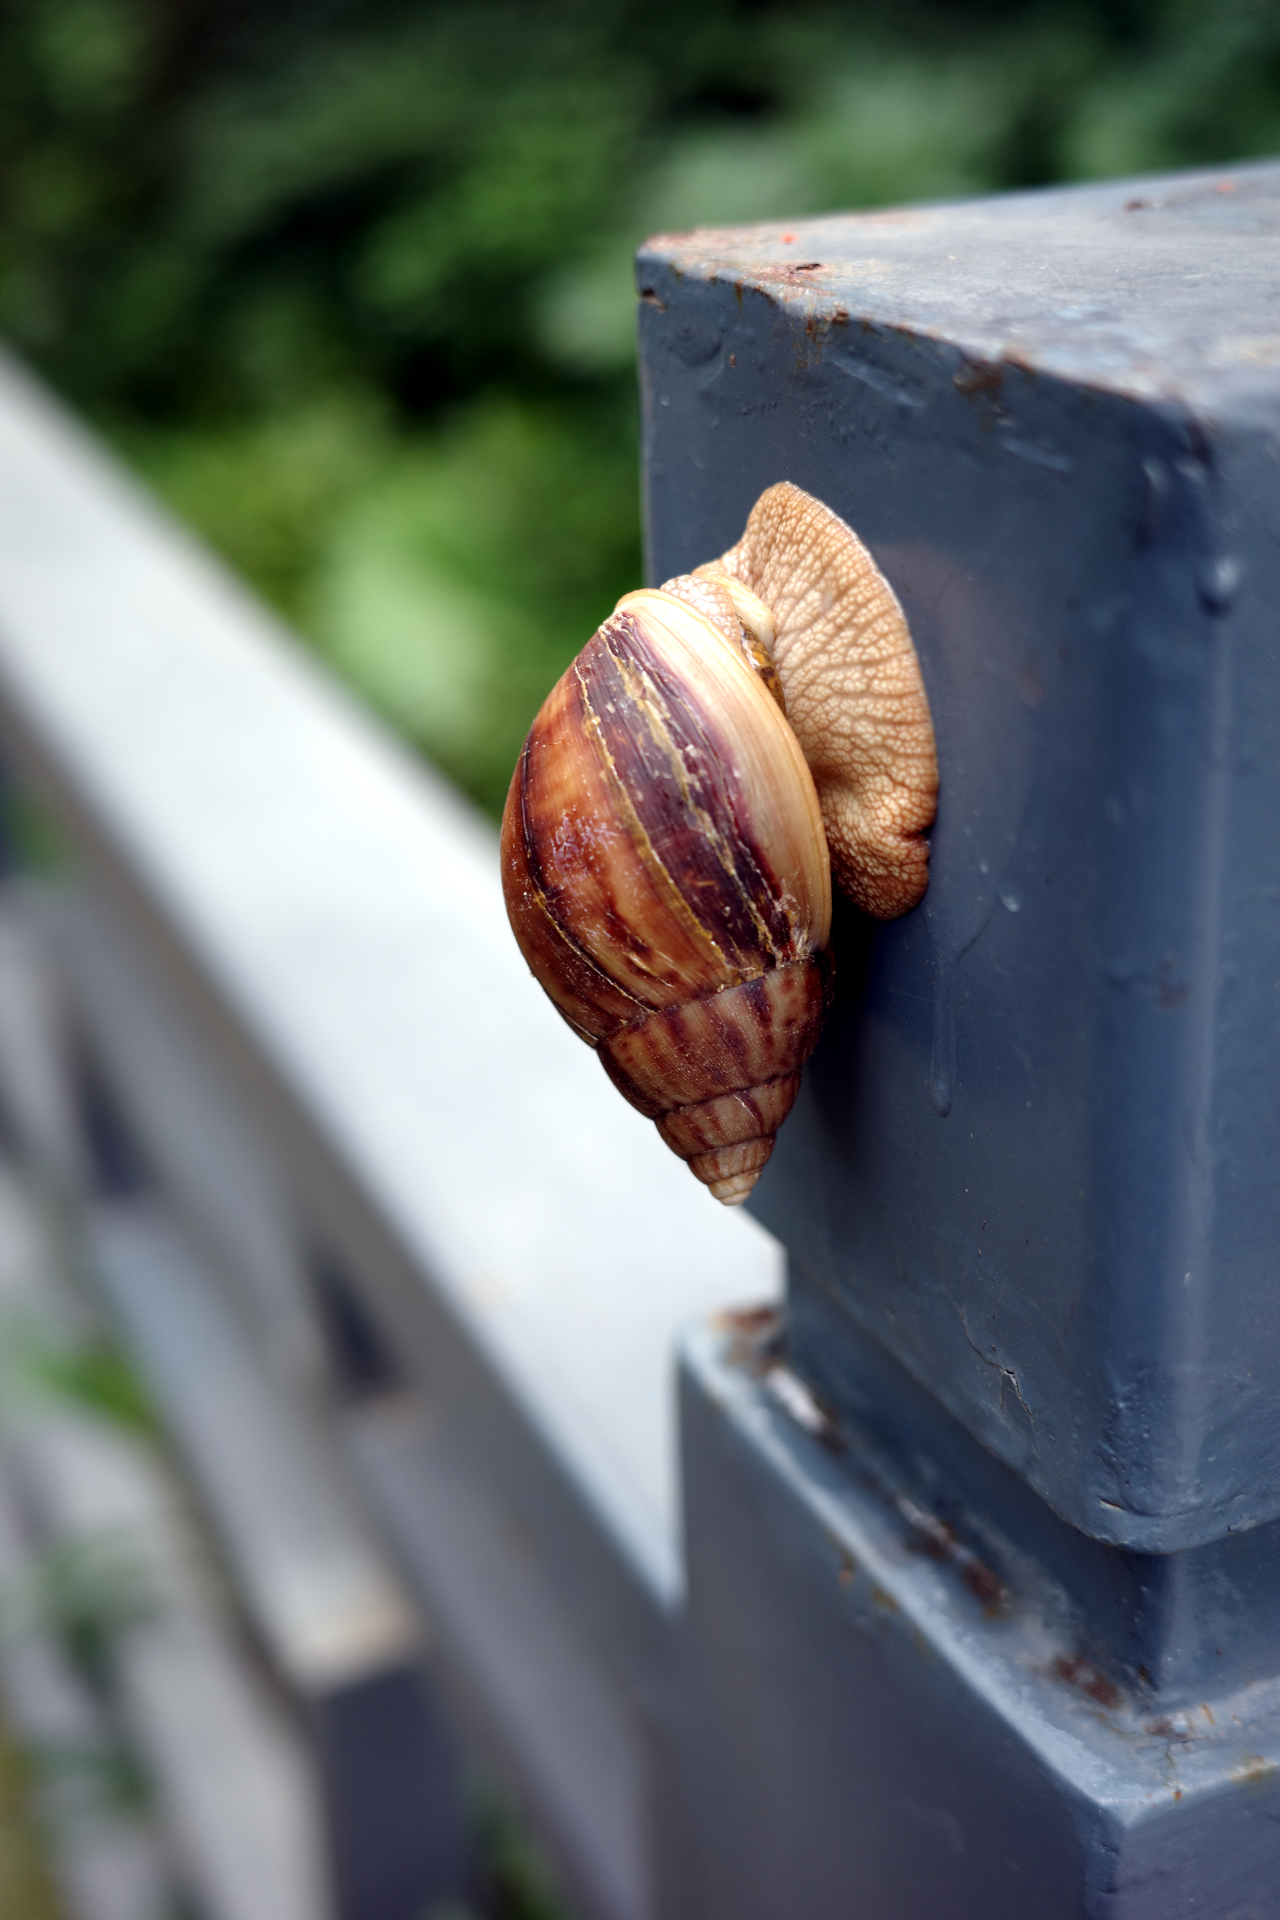 A snail attached to a post